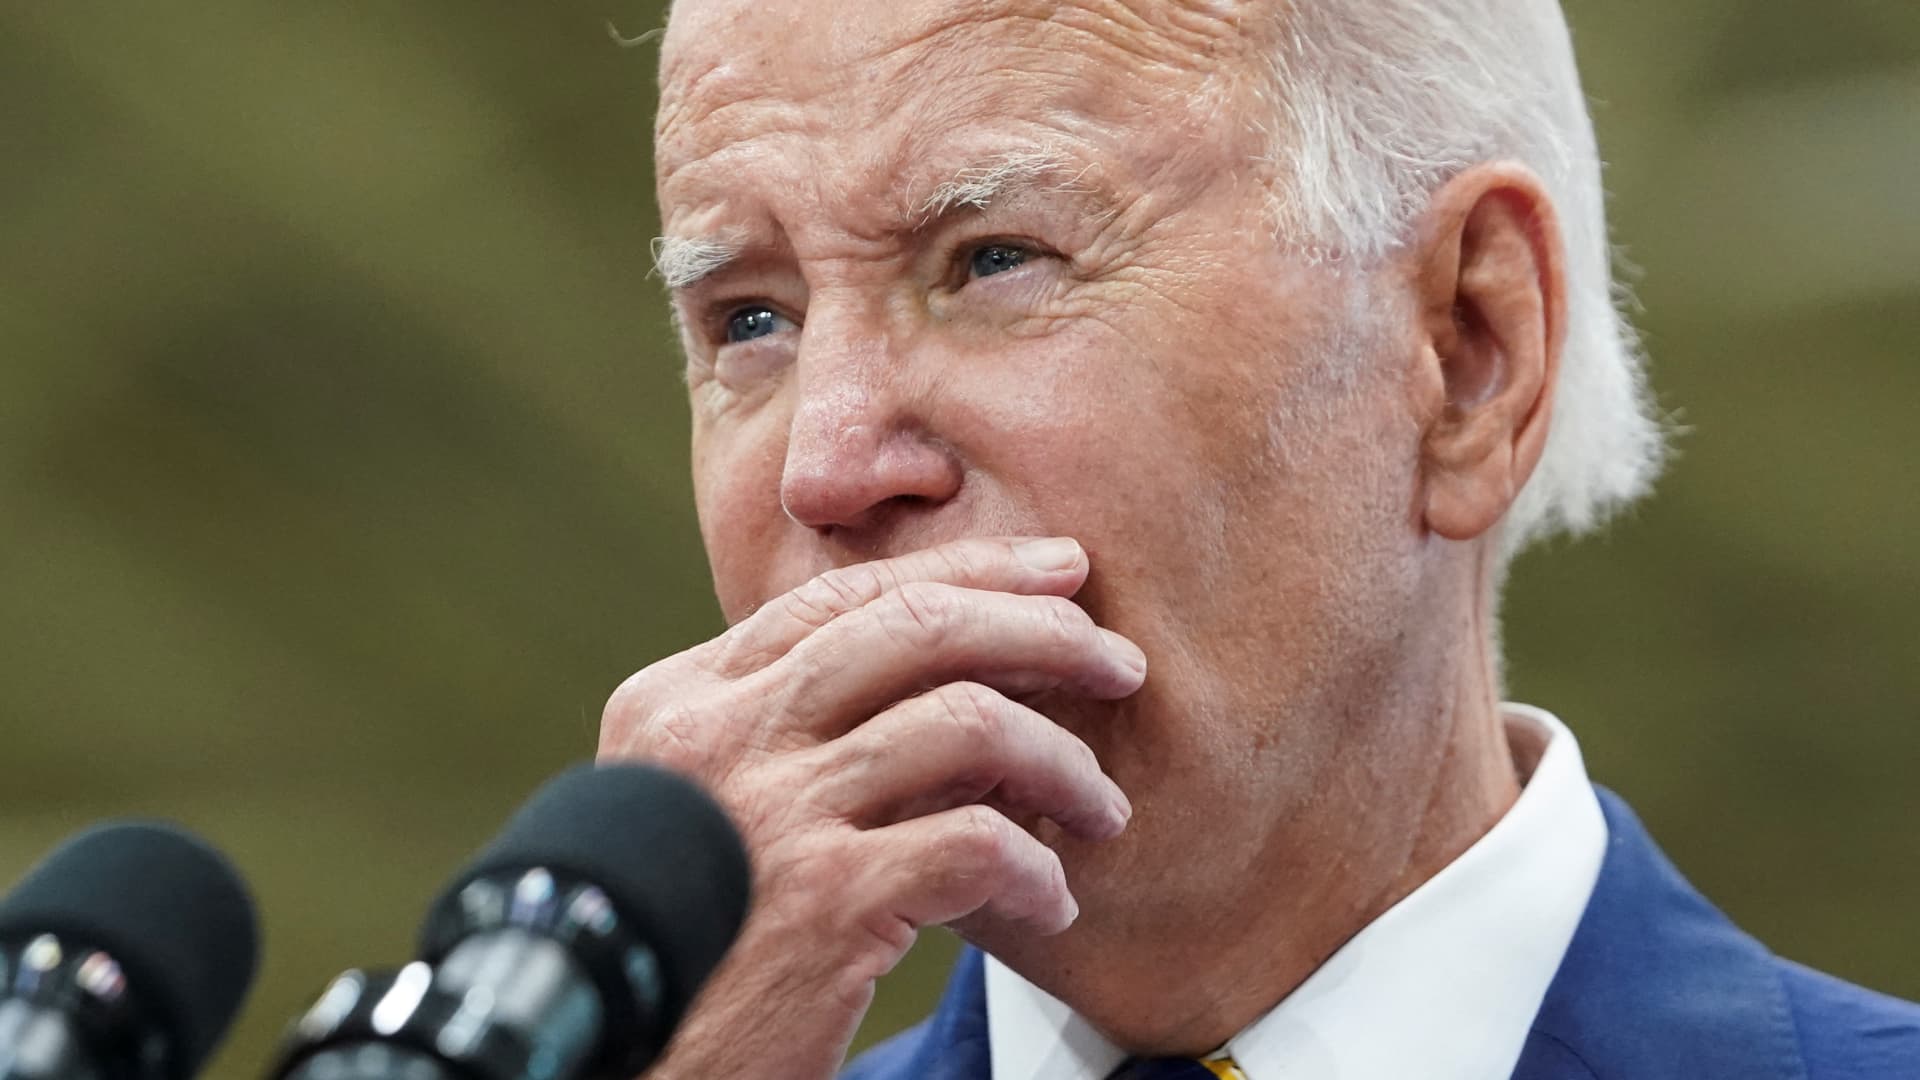 The Biden administration bet big on industrial policies. Experts warn it may not pay off